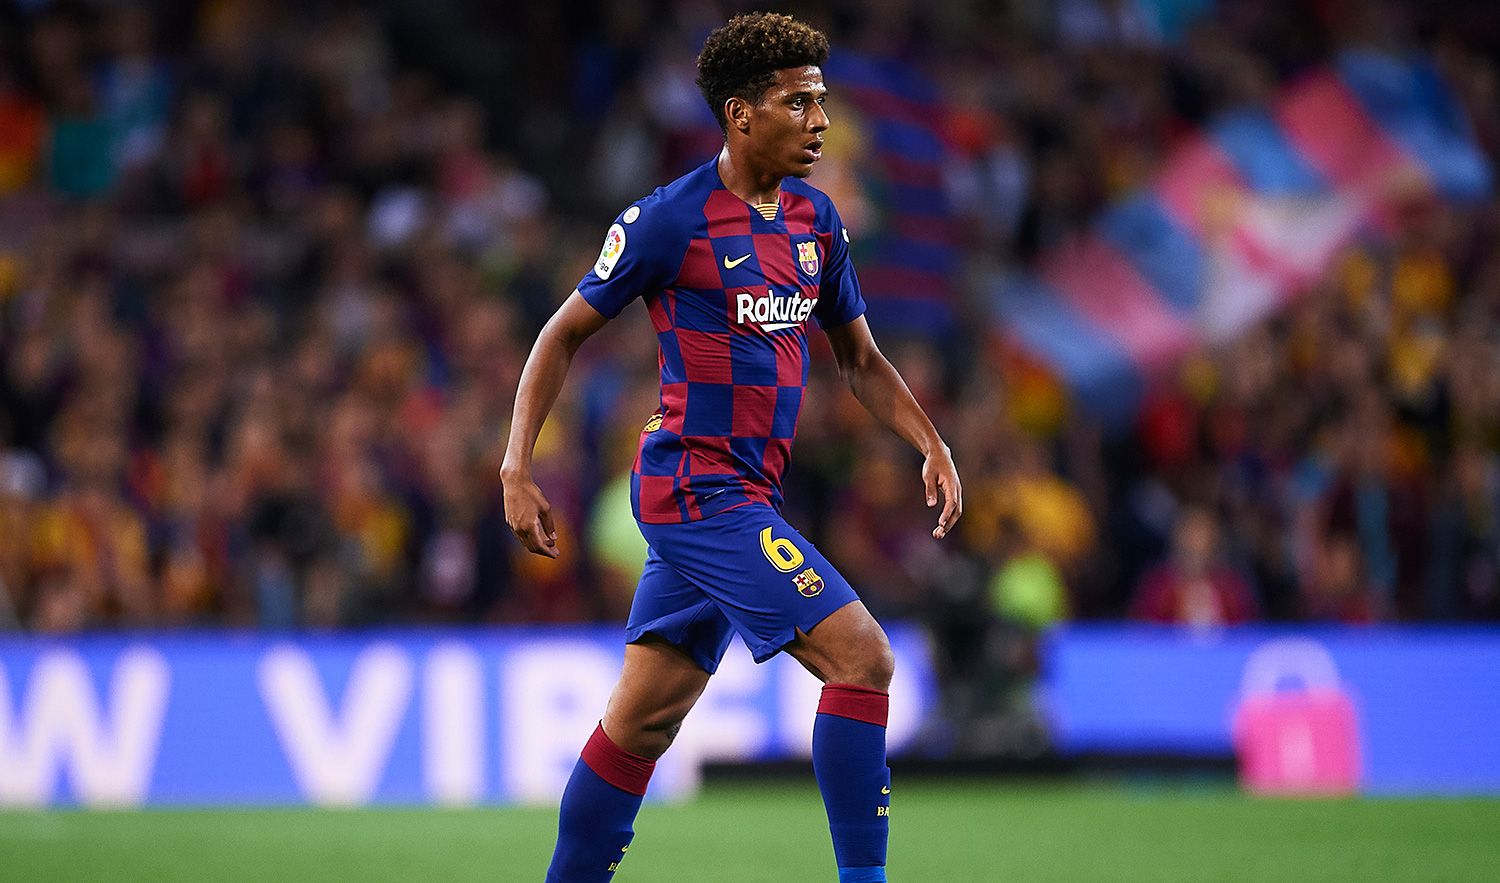 Todibo In the party against the Seville